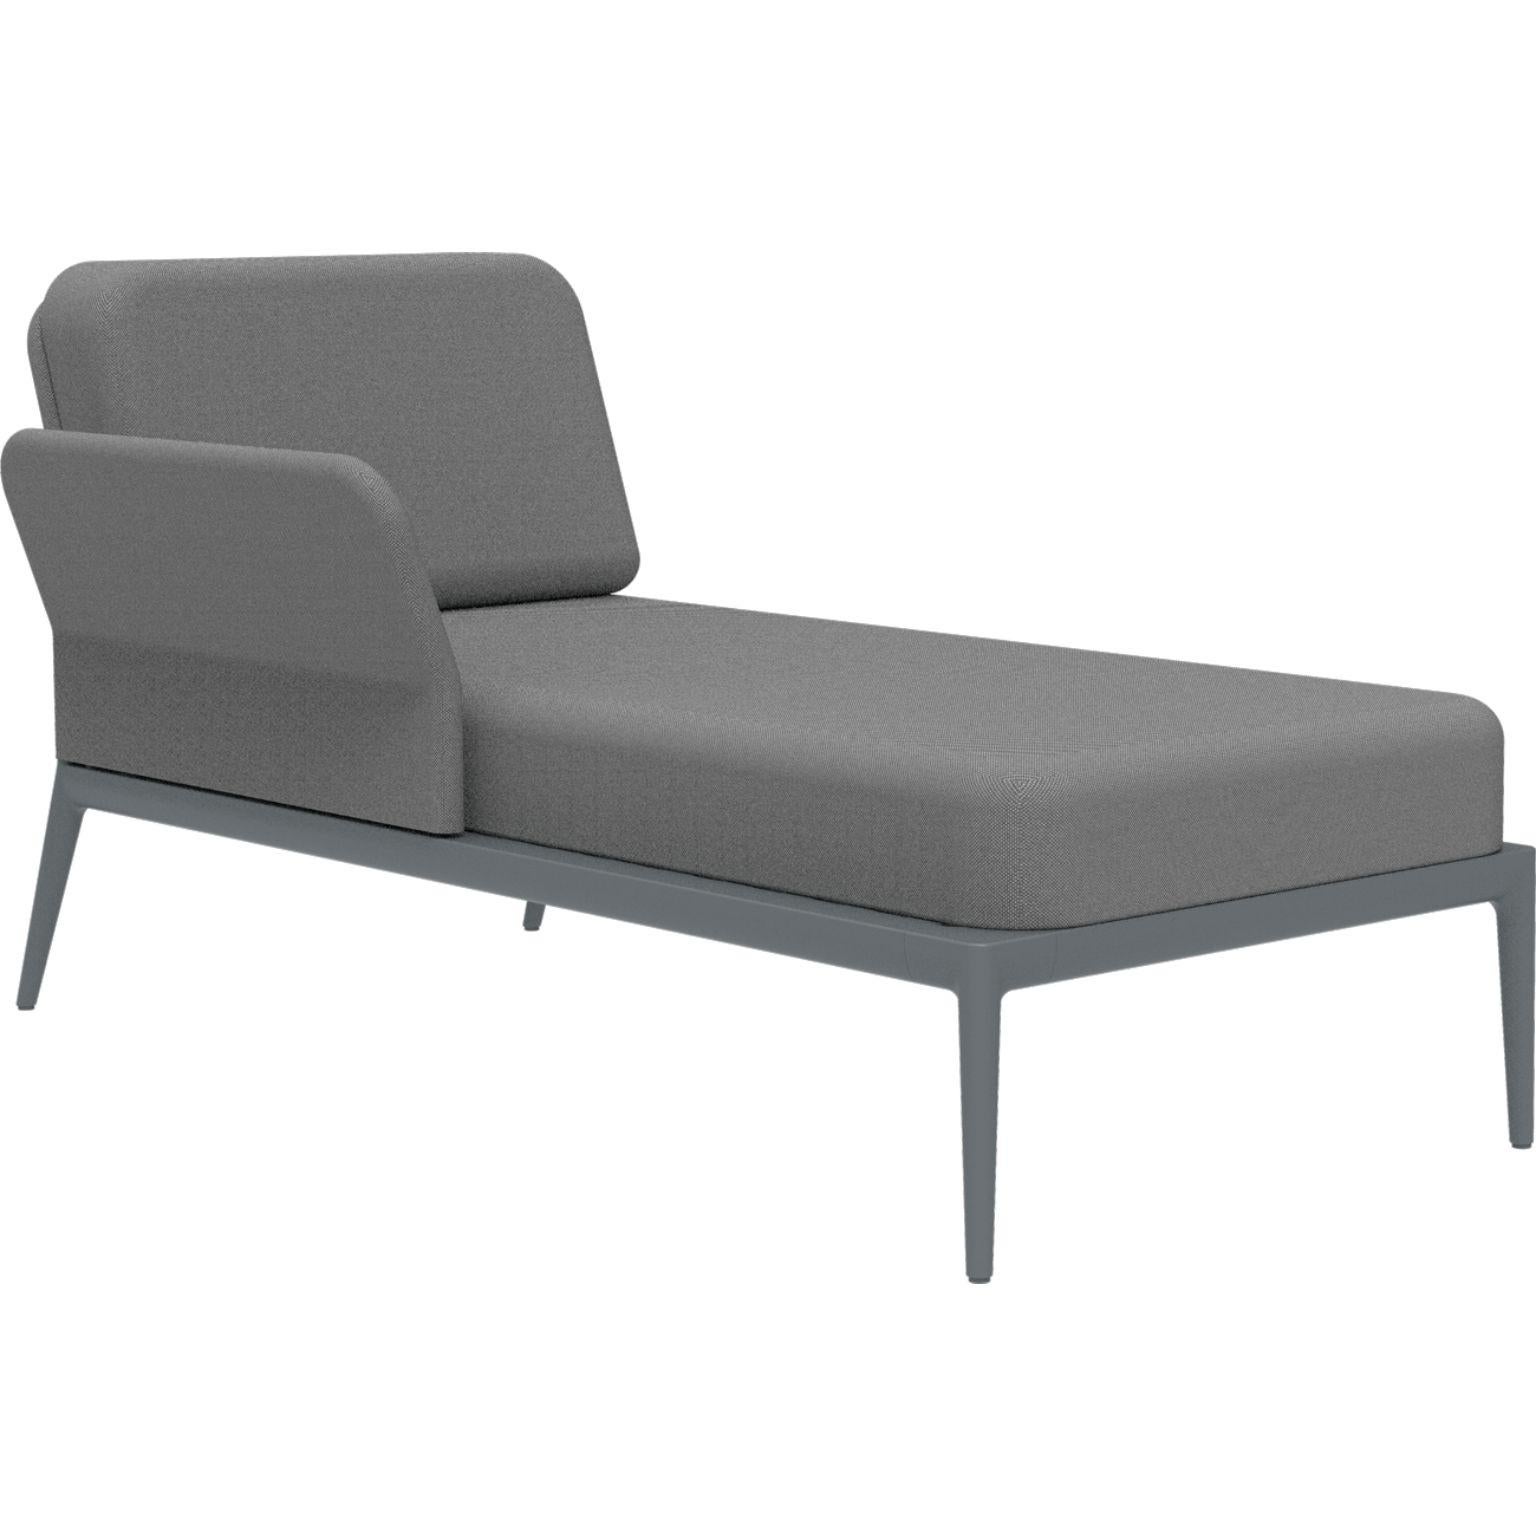 Cover Grey Right Chaise Longue by MOWEE
Dimensions: D 80 x W 155 x H 81 cm (seat height 42 cm).
Material: Aluminum and upholstery.
Weight: 28 kg.
Also available in different colors and finishes. Please contact us.

An unmistakable collection